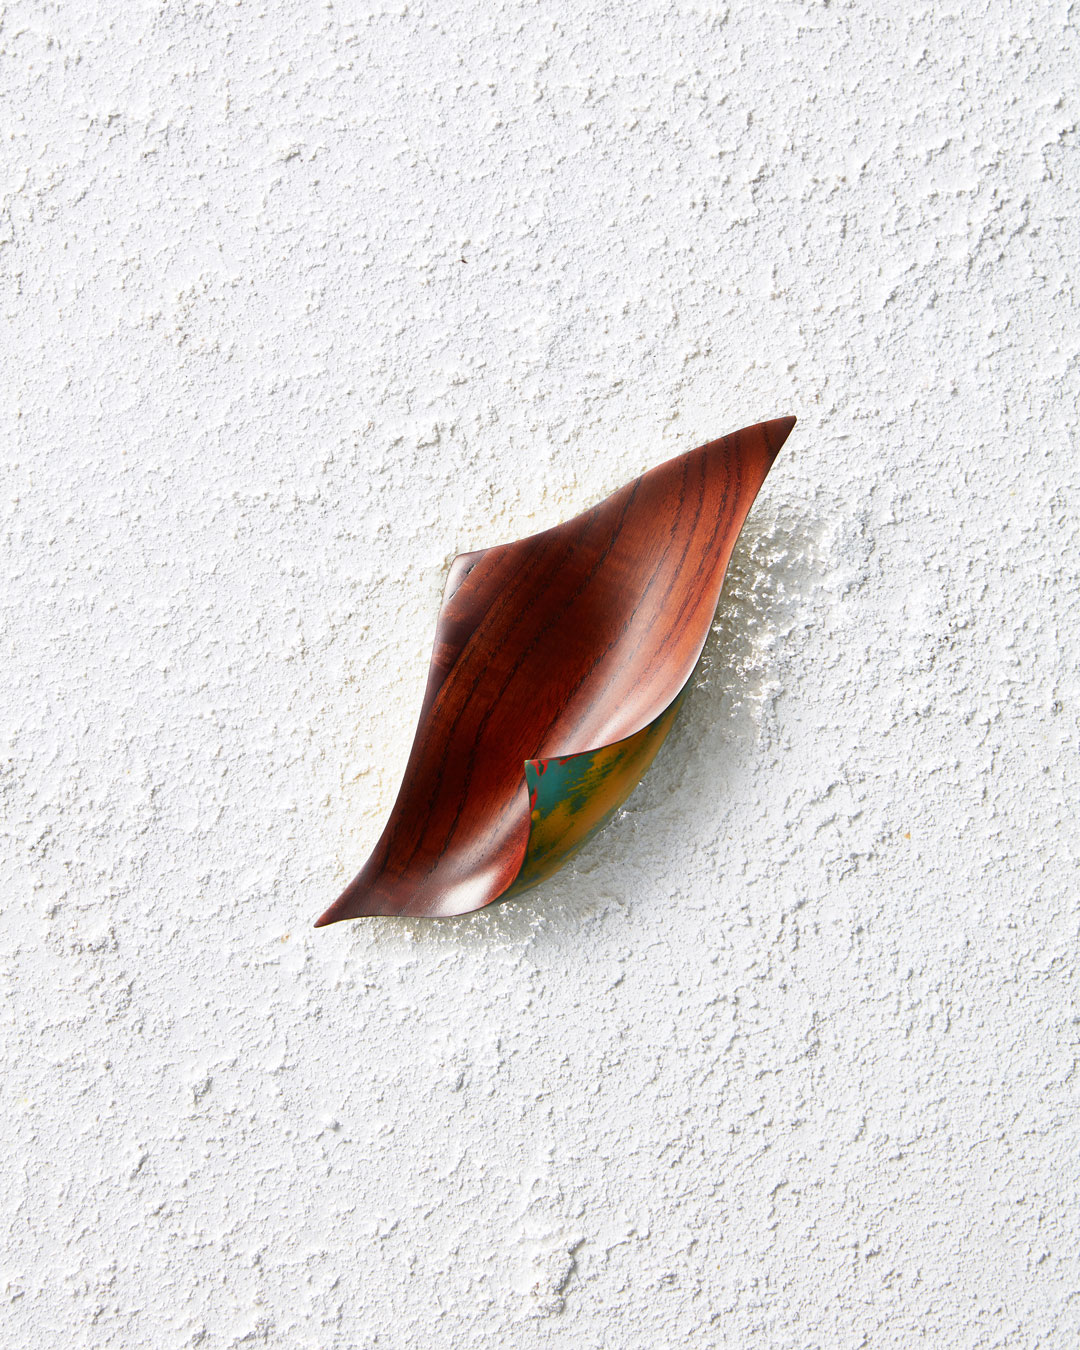 Joo Hyung Park, Confluence 2, 2018, brooch; walnut, ottchil (lacquer), silver, 133 x 58 x 45 mm, €975